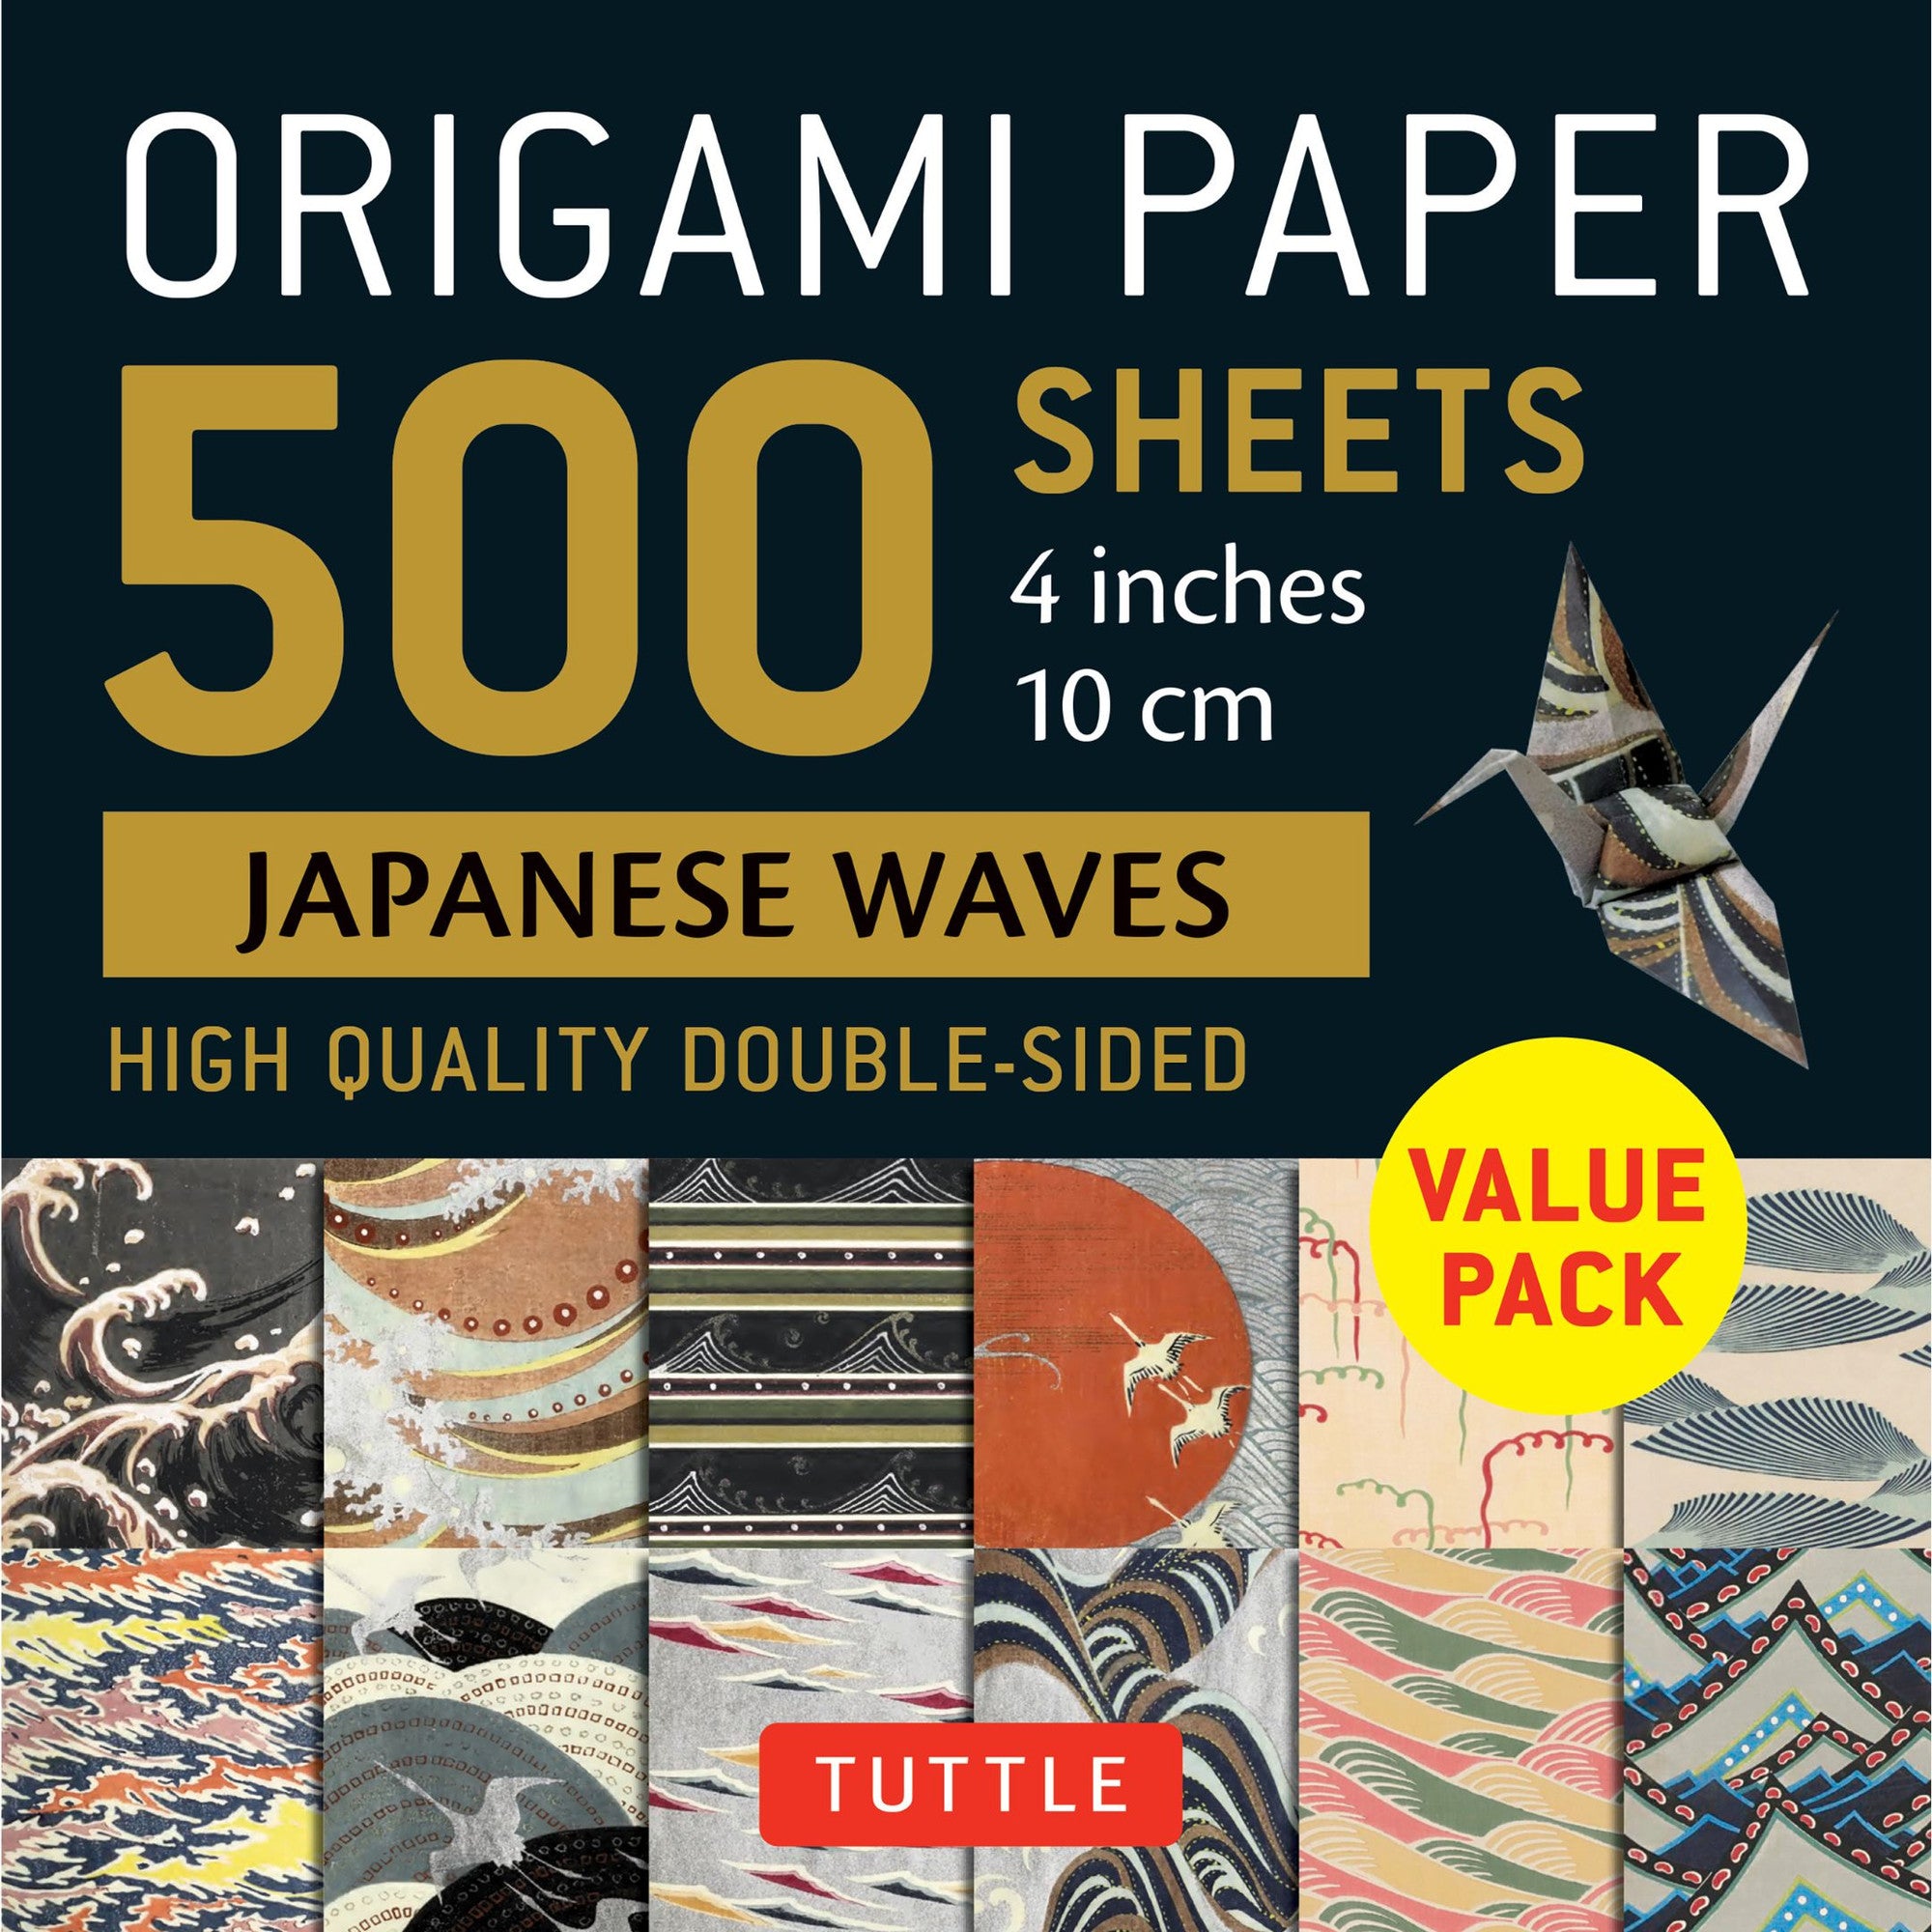 500 Sheets 4” Japanese Waves Origami Paper